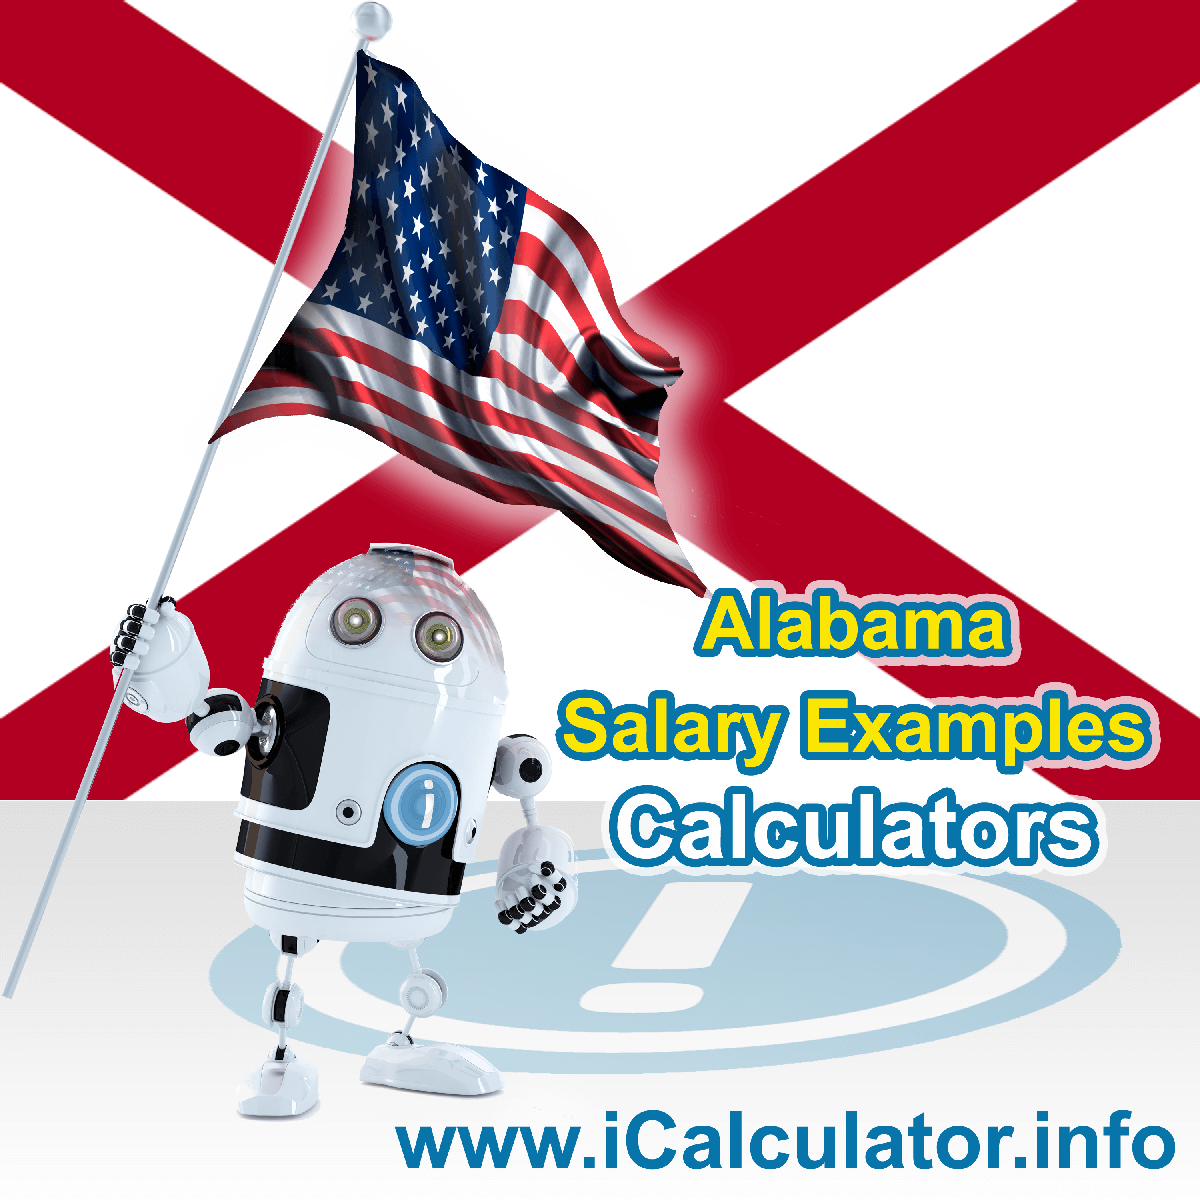 Alabama Salary Example for $ 180,000.00 in 2023 | iCalculator™ | $ 180,000.00 salary example for employee and employer paying Alabama State tincome taxes. Detailed salary after tax calculation including Alabama State Tax, Federal State Tax, Medicare Deductions, Social Security, Capital Gains and other income tax and salary deductions complete with supporting Alabama state tax tables 